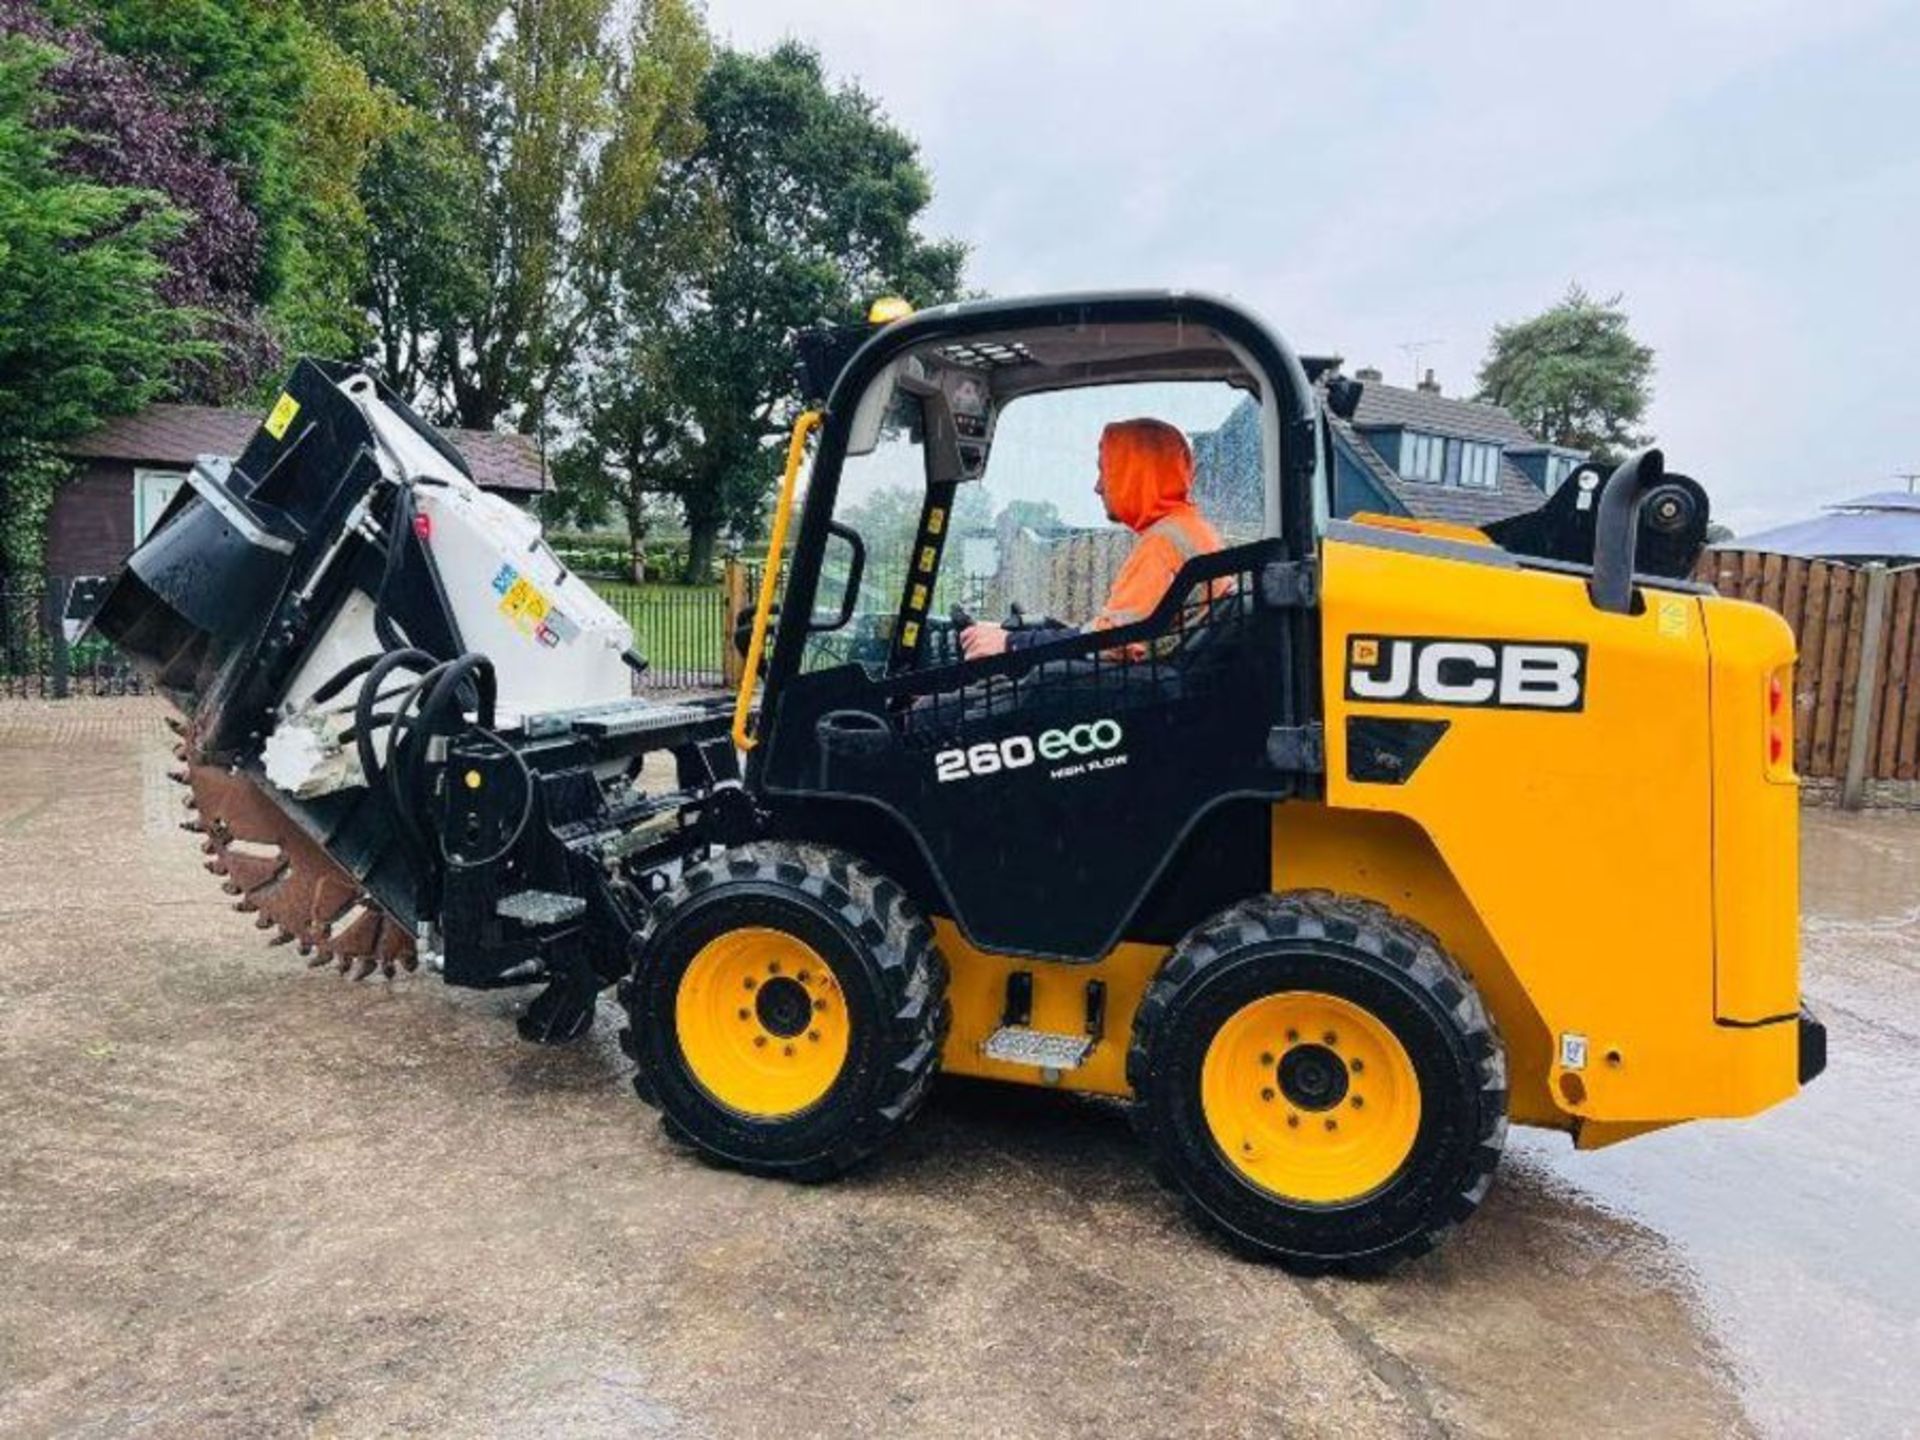 JCB 260 4WD SKIDSTEER *YEAR 2017, ONLY 182 HOURS * C/W WHEEL SAW - Image 18 of 18